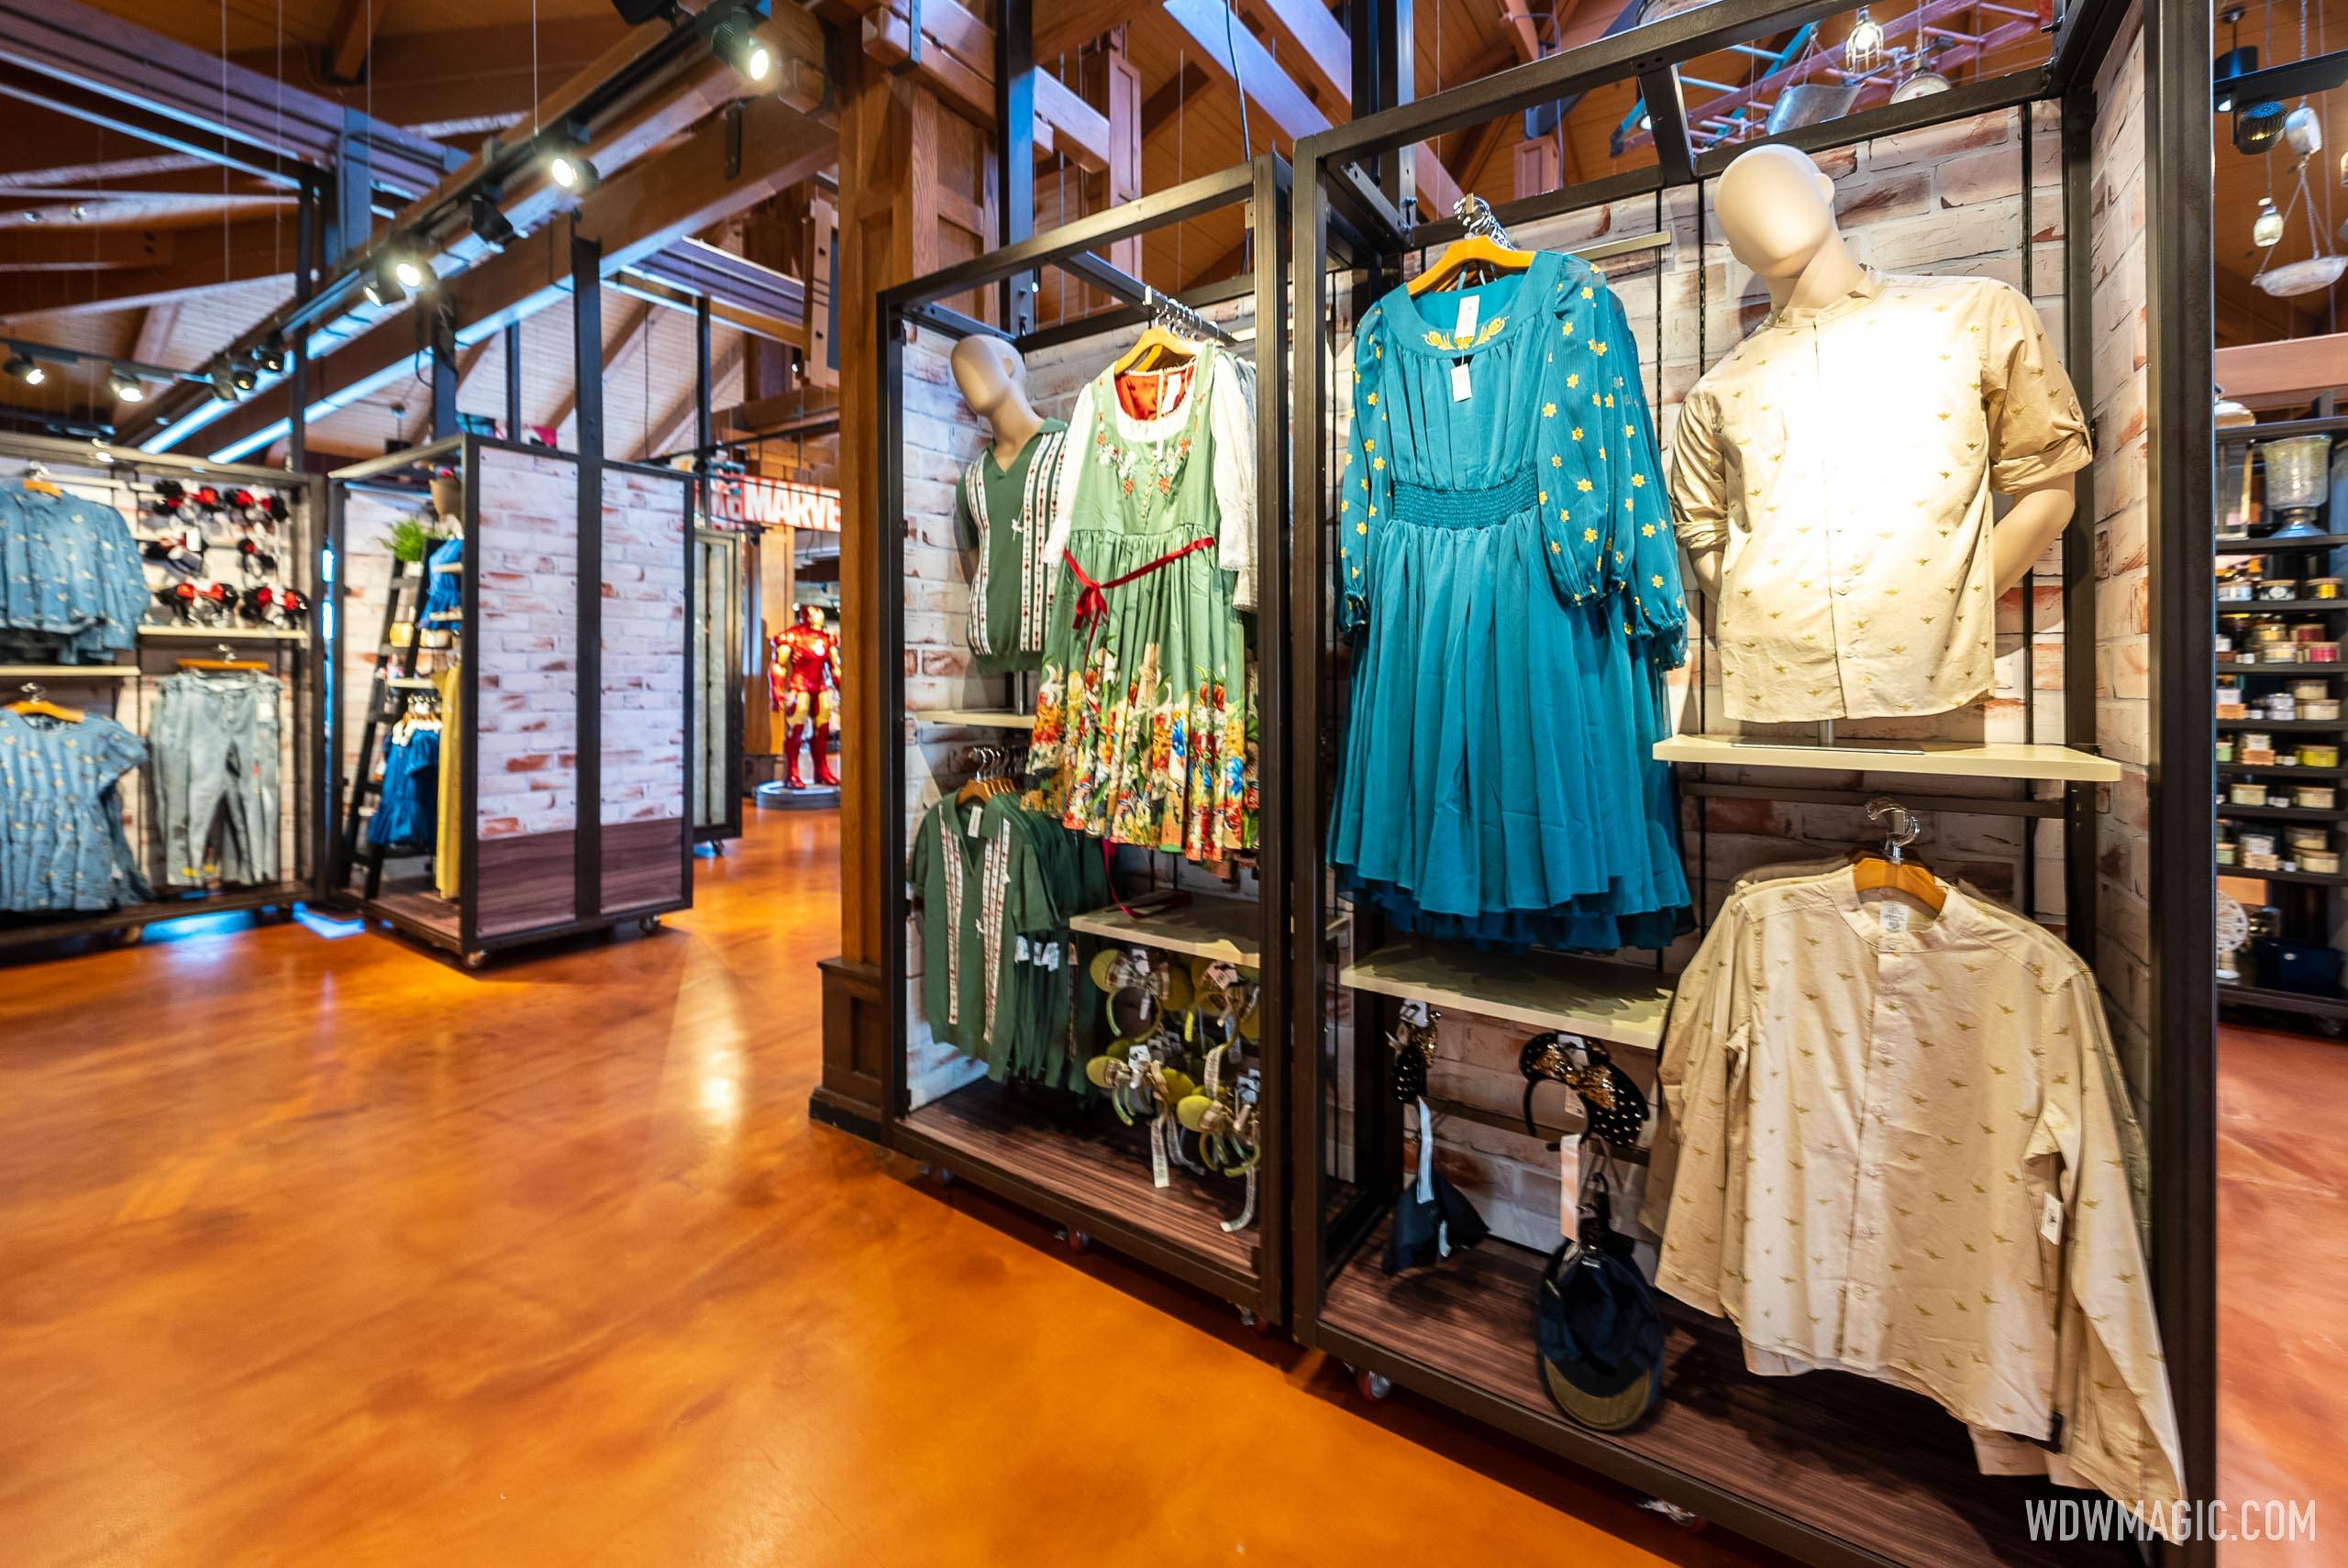 The Dress Shop returns to Disney Springs at the Marketplace Co-Op